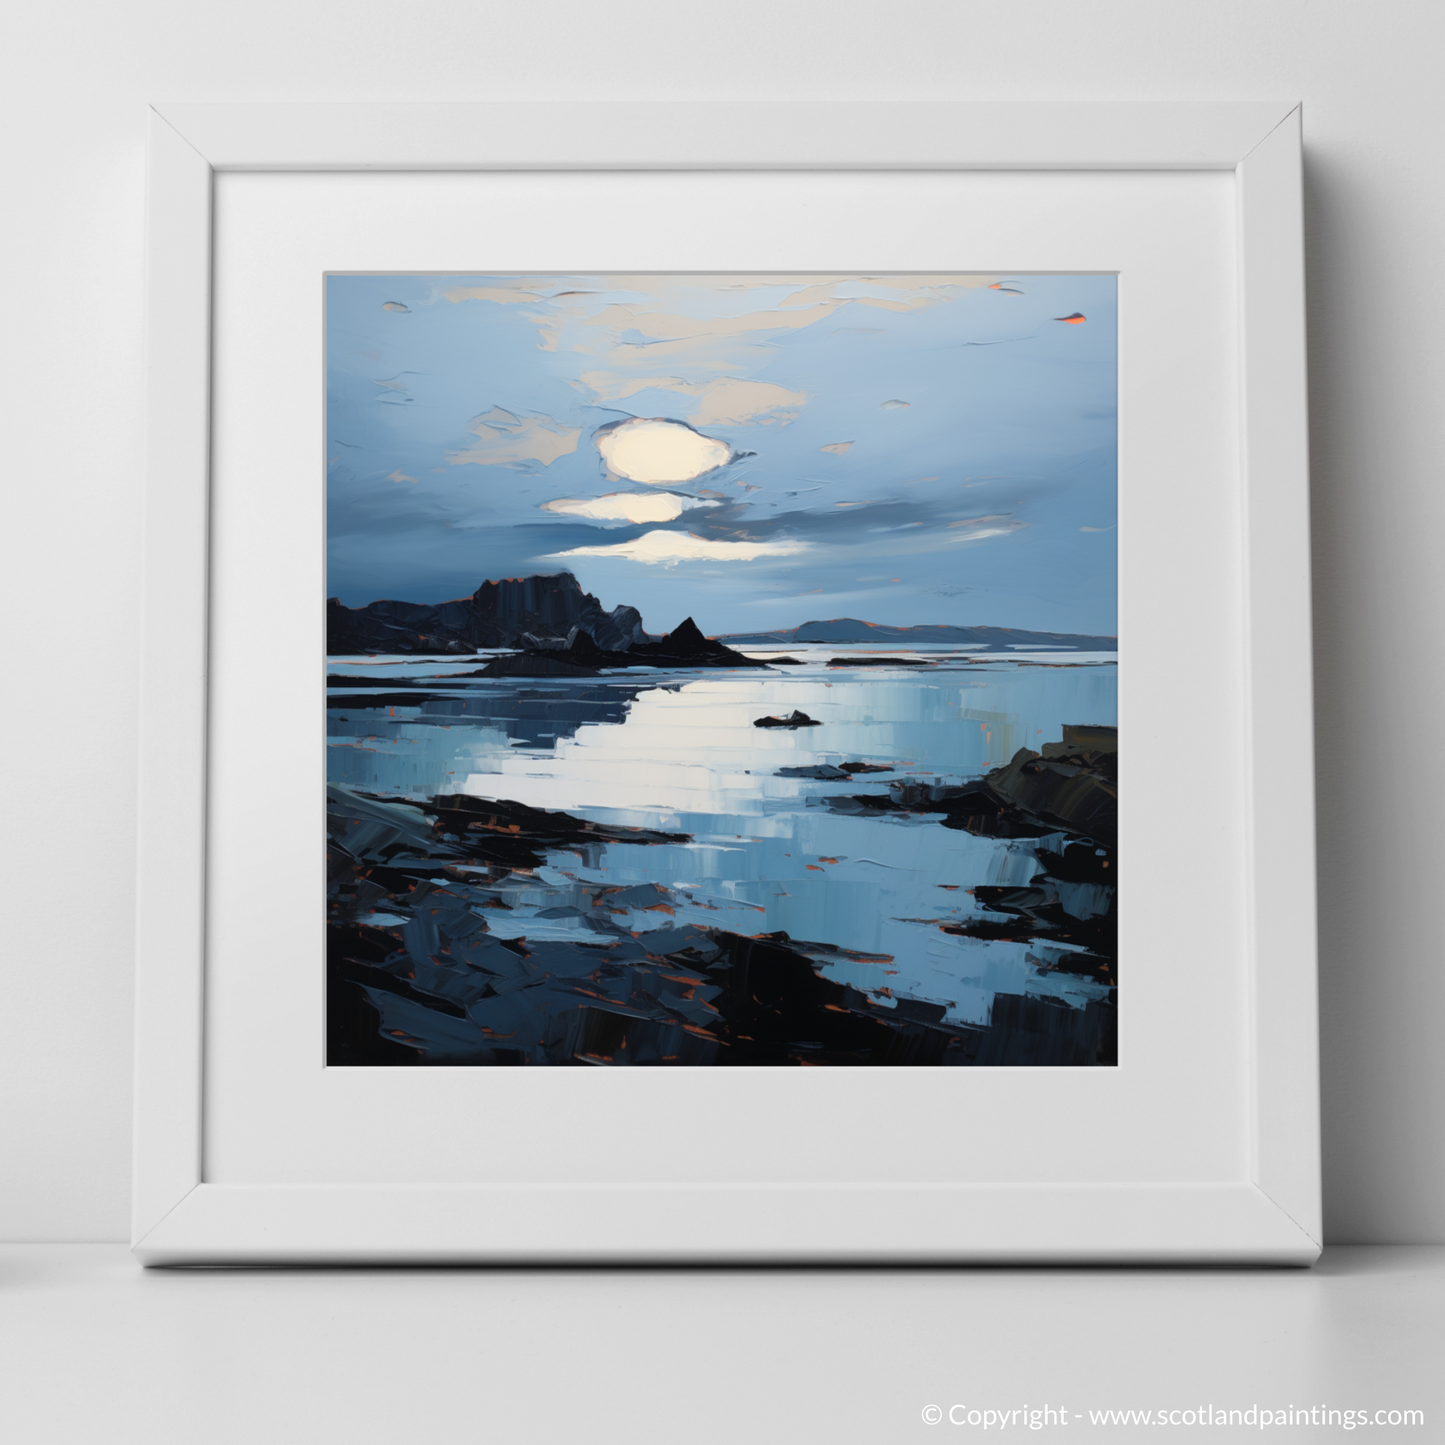 Art Print of Balnakeil Bay at dusk with a white frame